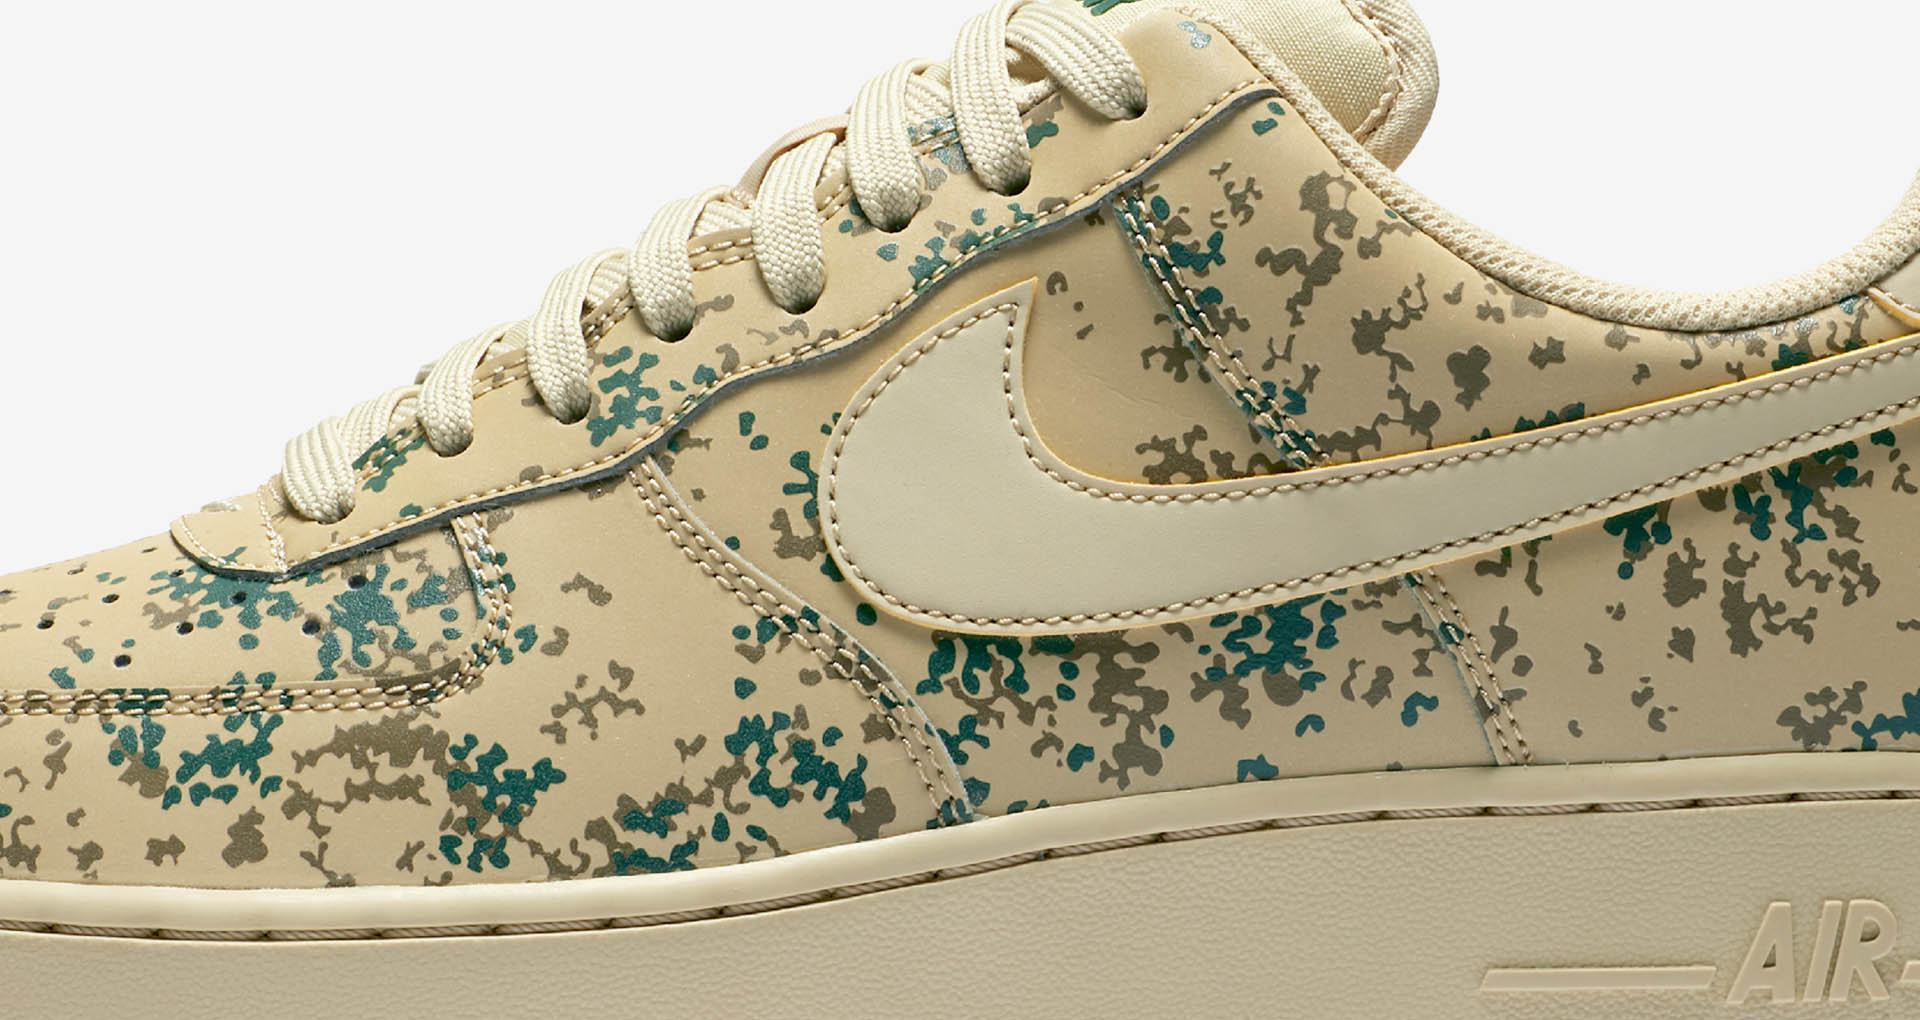 07-nike-air-force-1-low-lv8-beige-camo-823511-700